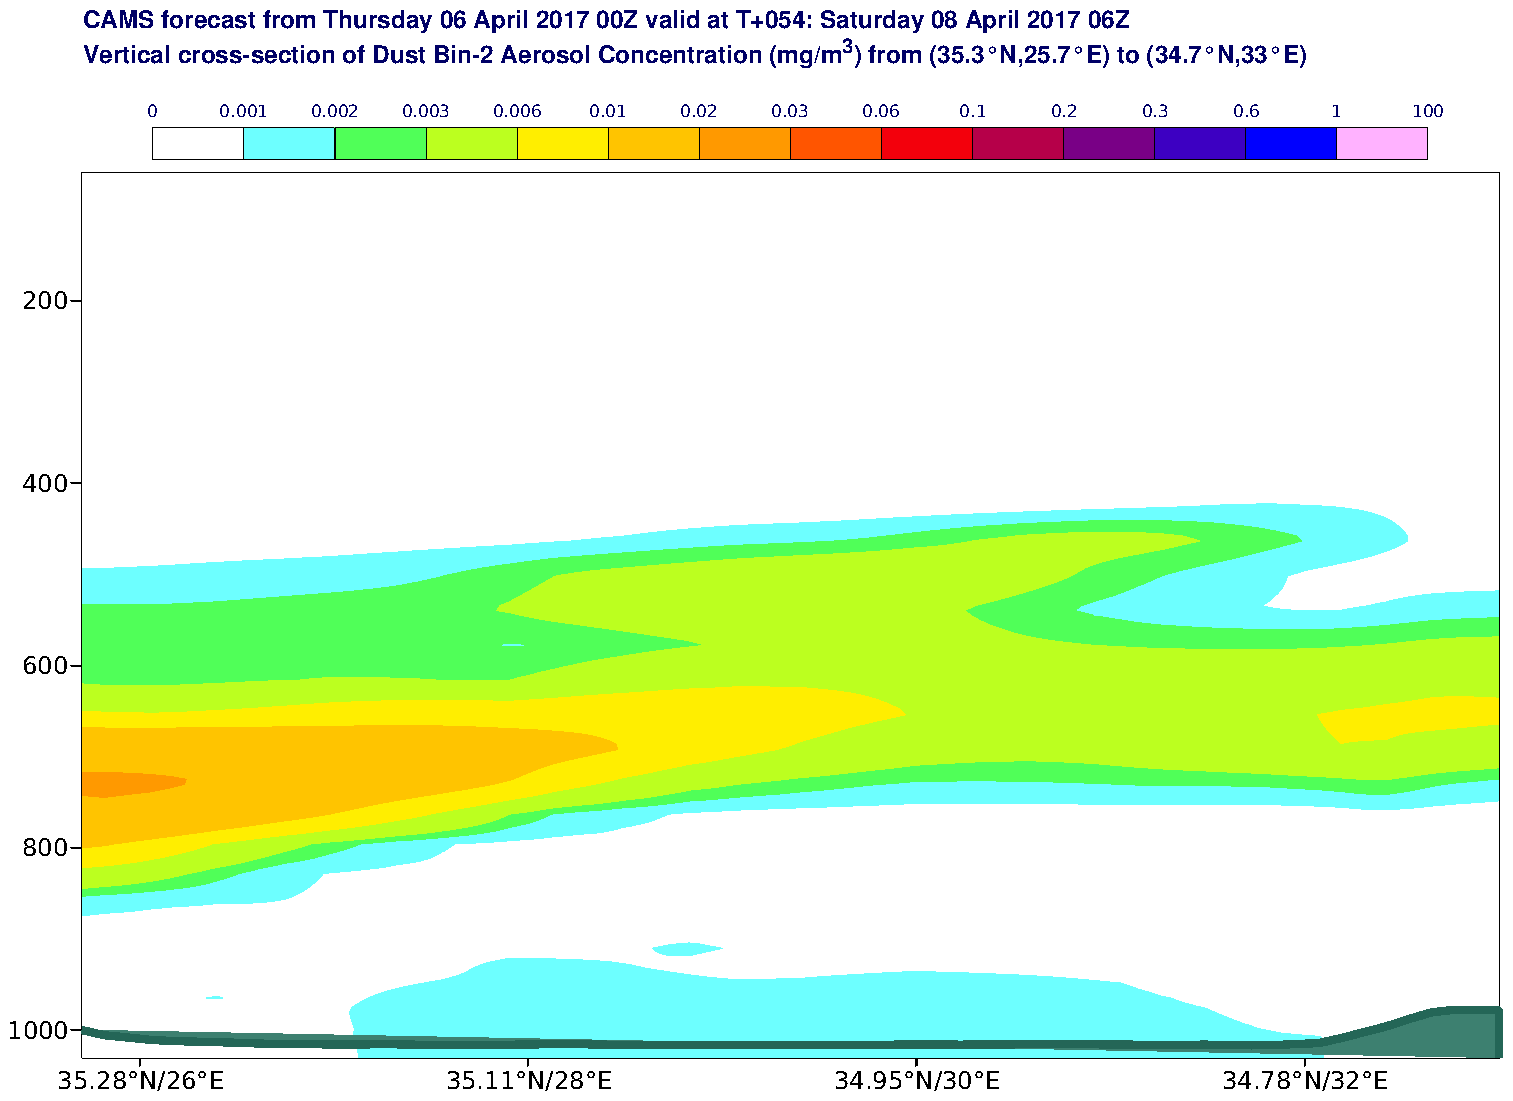 Vertical cross-section of Dust Bin-2 Aerosol Concentration (mg/m3) valid at T54 - 2017-04-08 06:00